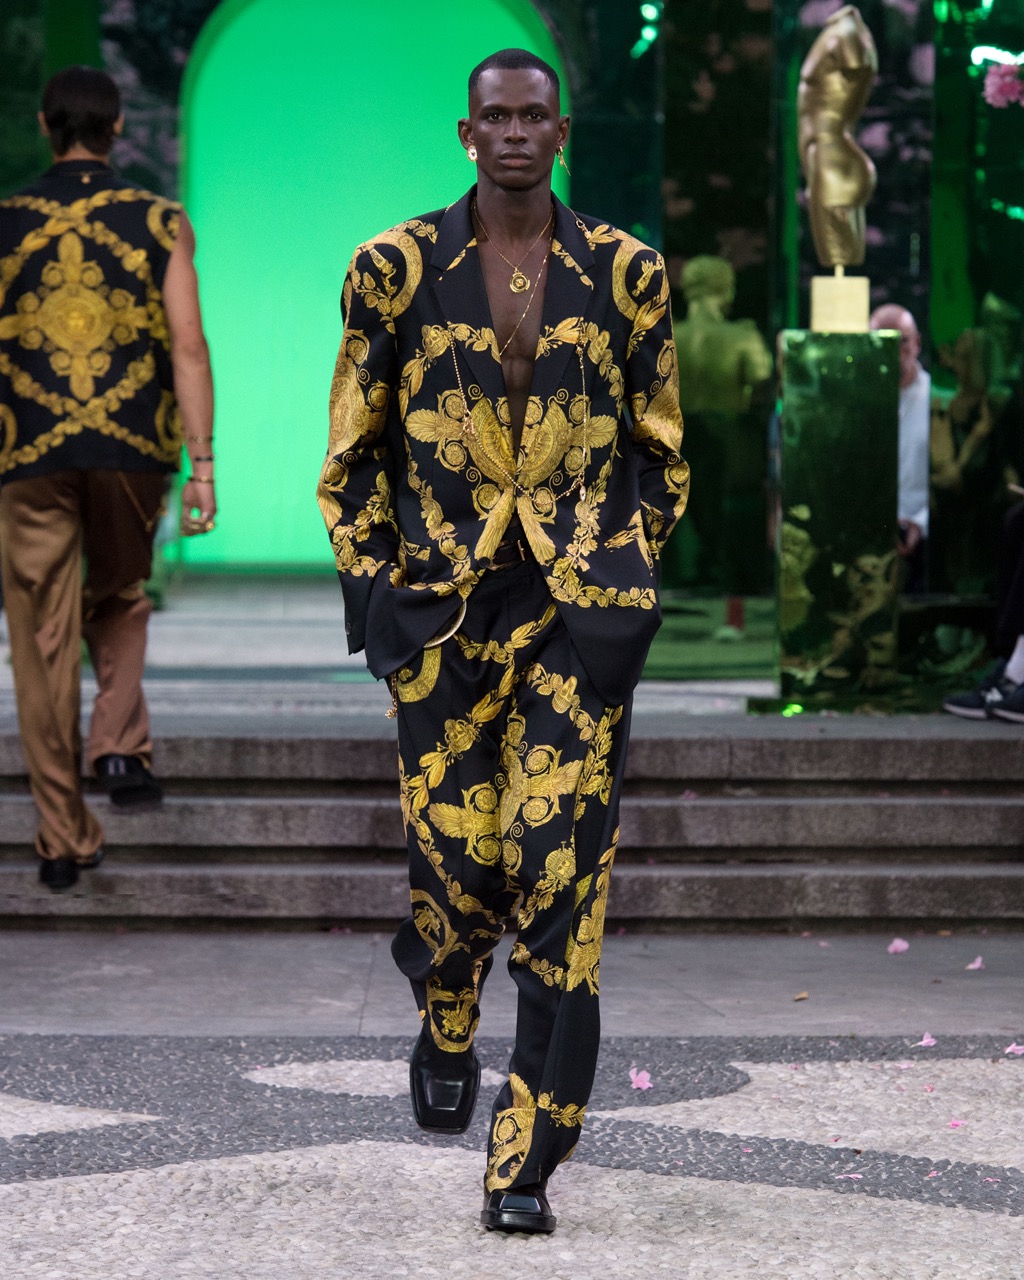 Milan Men's Fashion Week: Versace invoked pop Baroque style with a